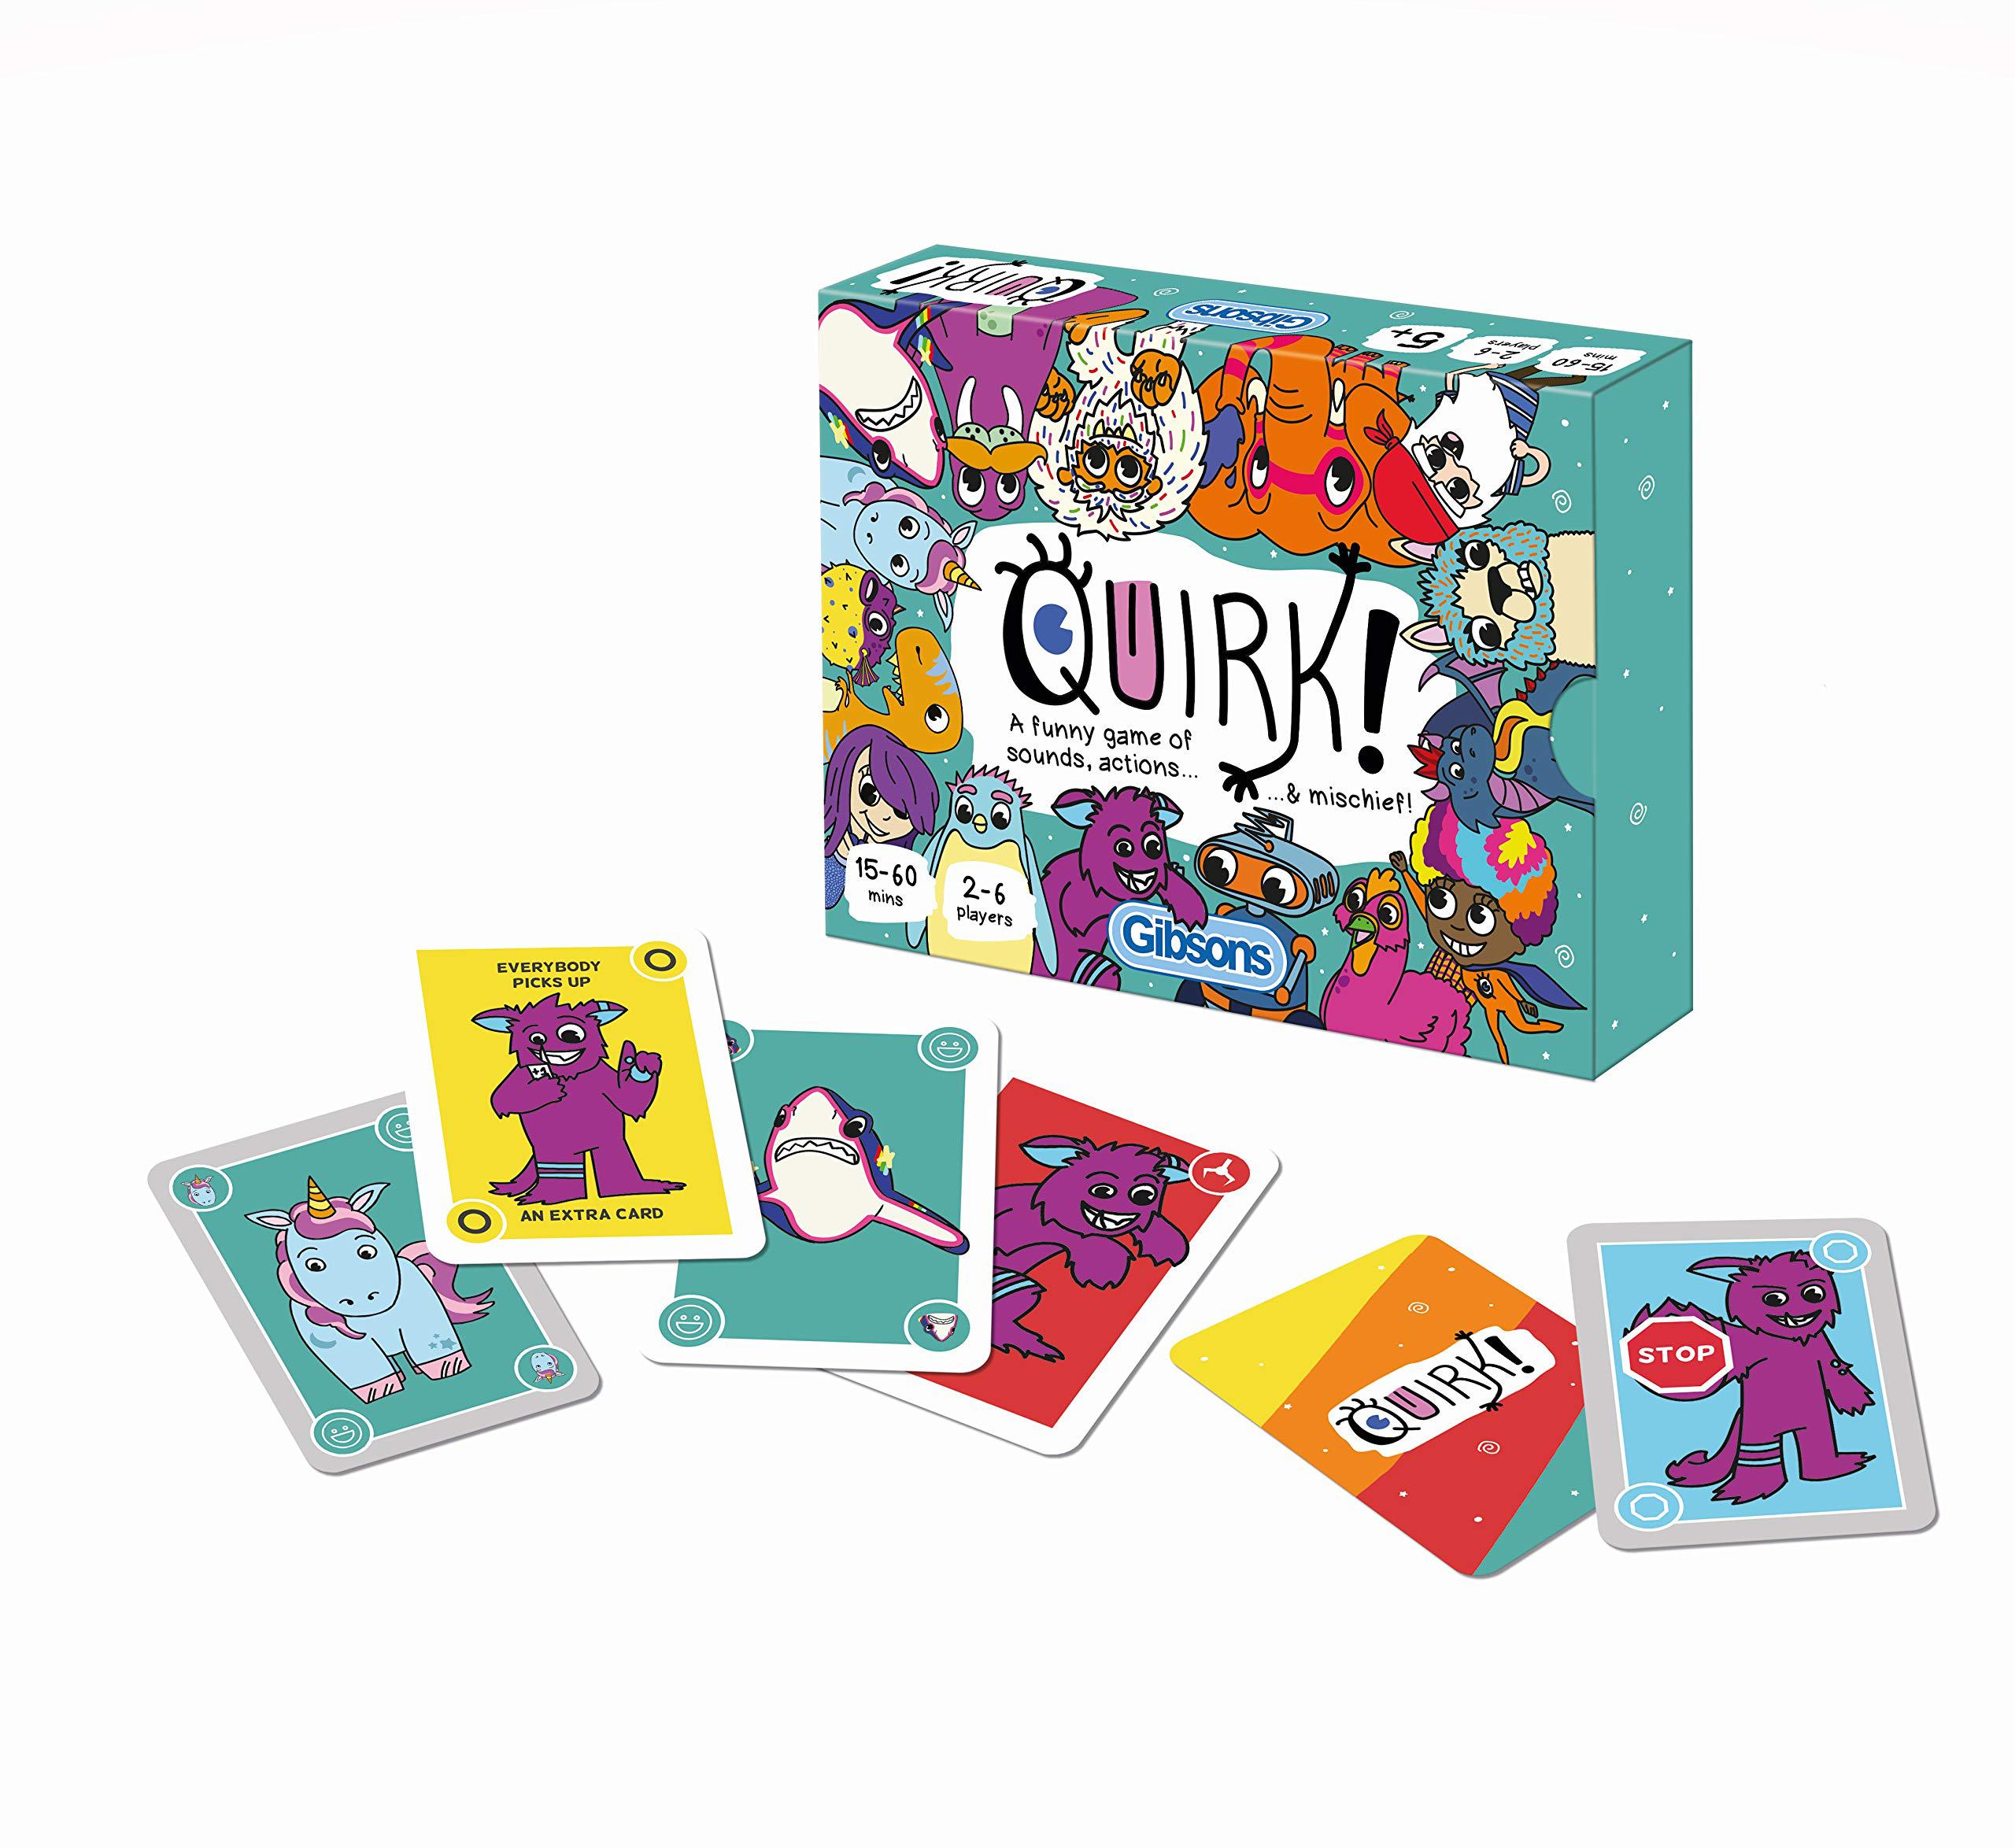 Gibsons quirk! by gibsons - card games adults and kids - 2-6 players - cards games for family - 15-60 minutes of gameplay - games for